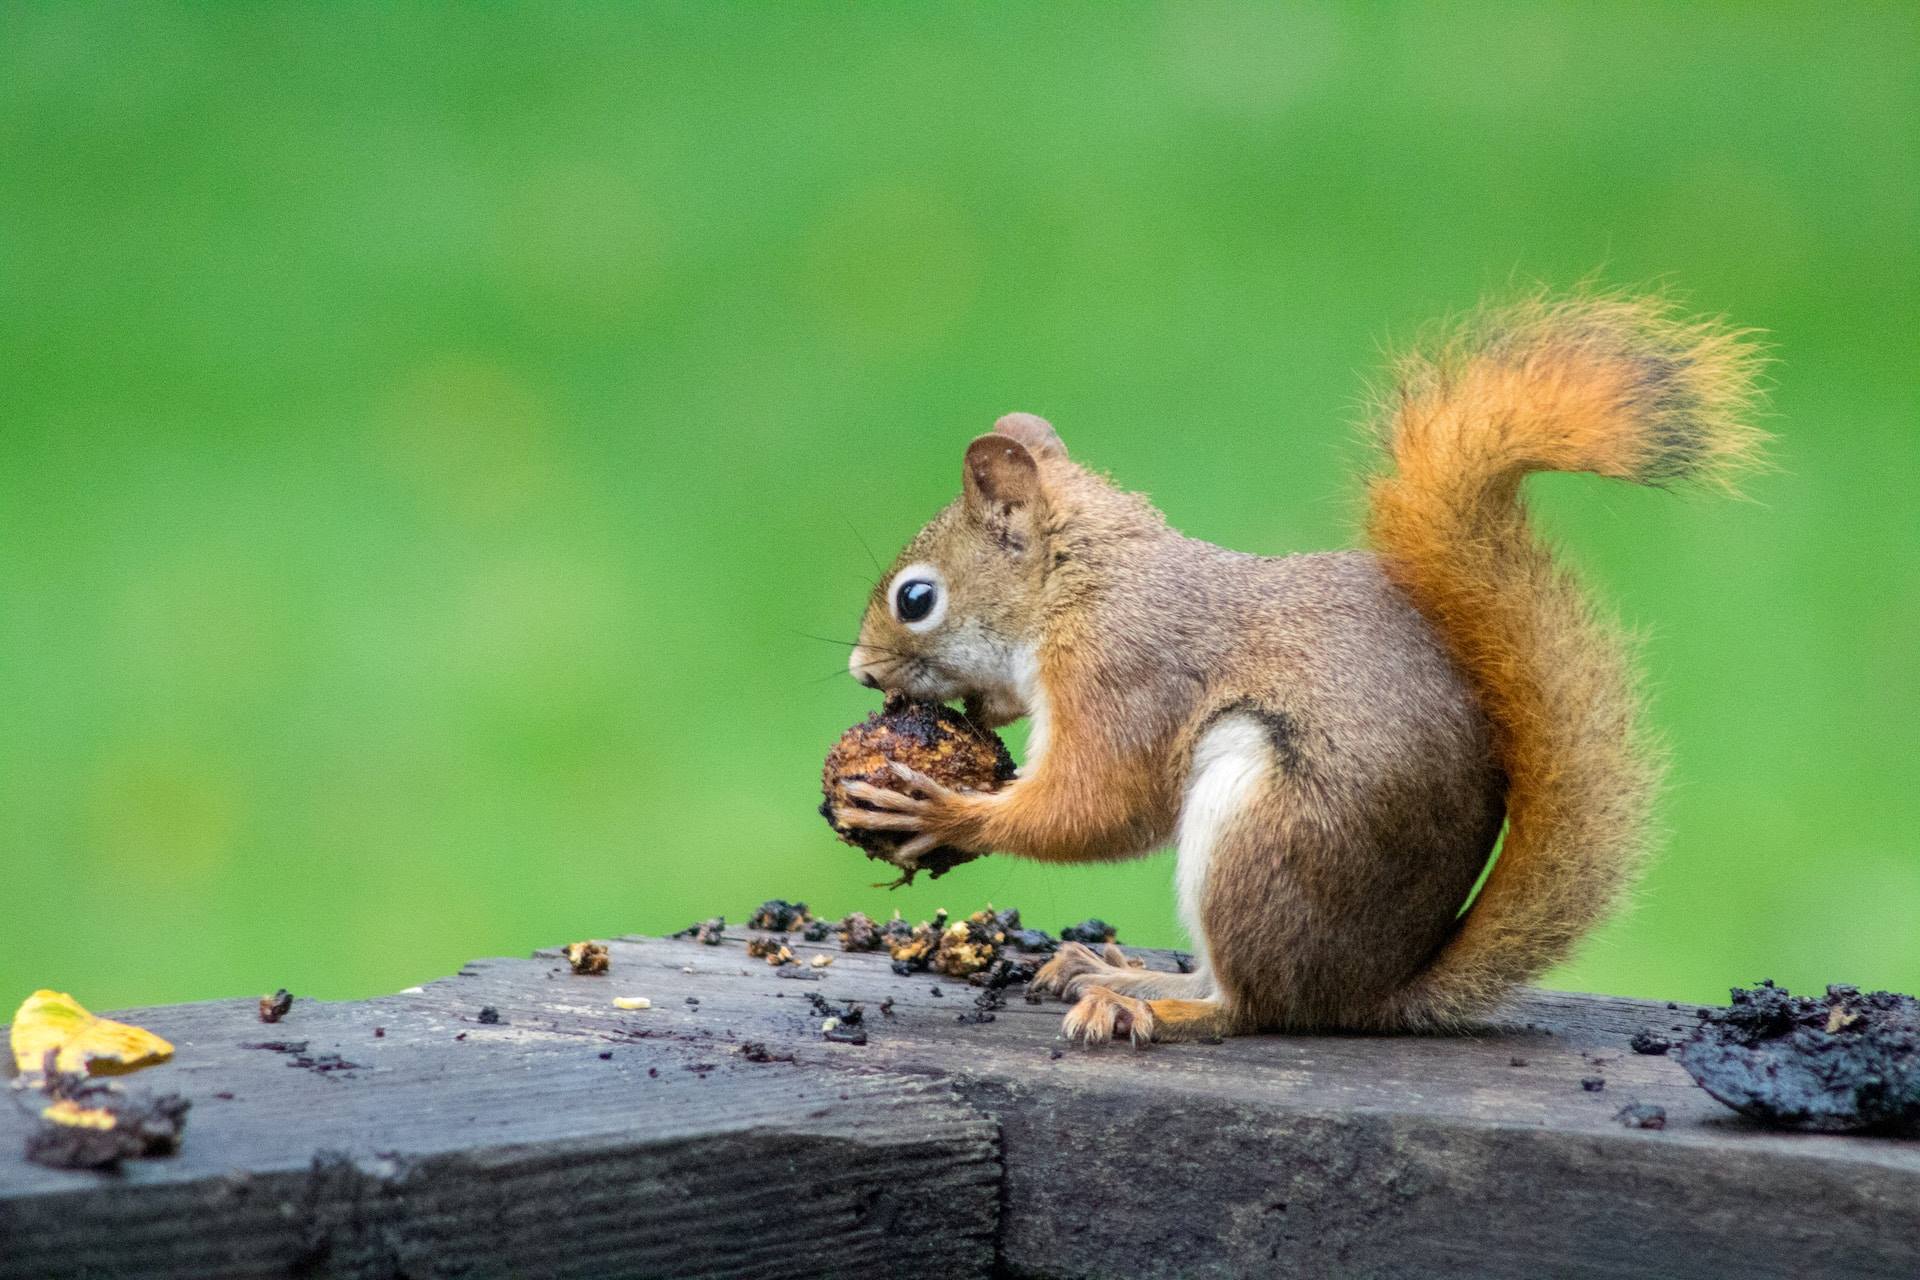 The Ultimate Guide To Safely Removing And Relocating Squirrels From Your Property